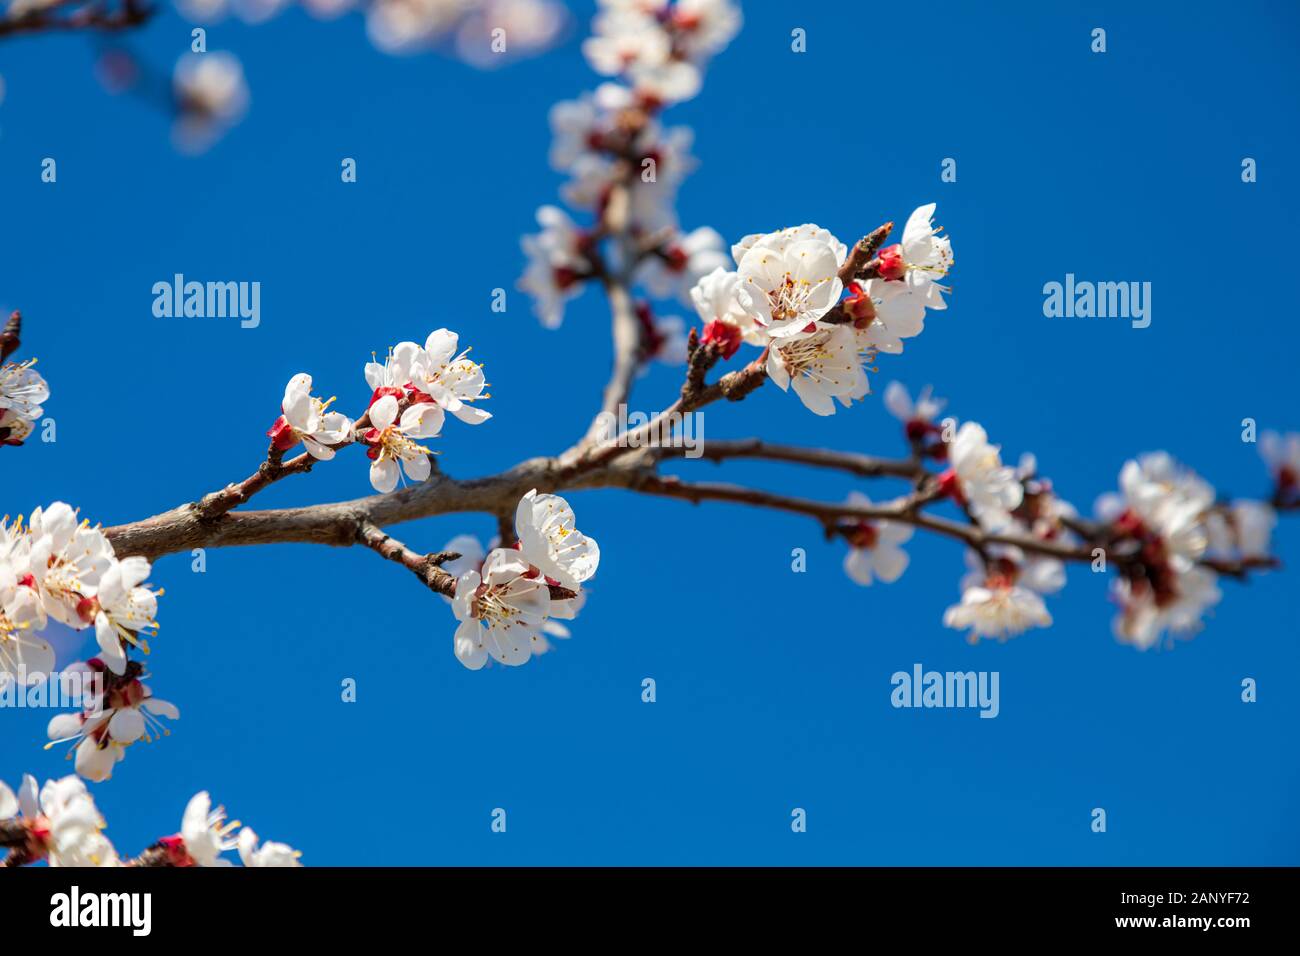 Springtime detail of tree branches with white flowers in bloom. Image Stock Photo